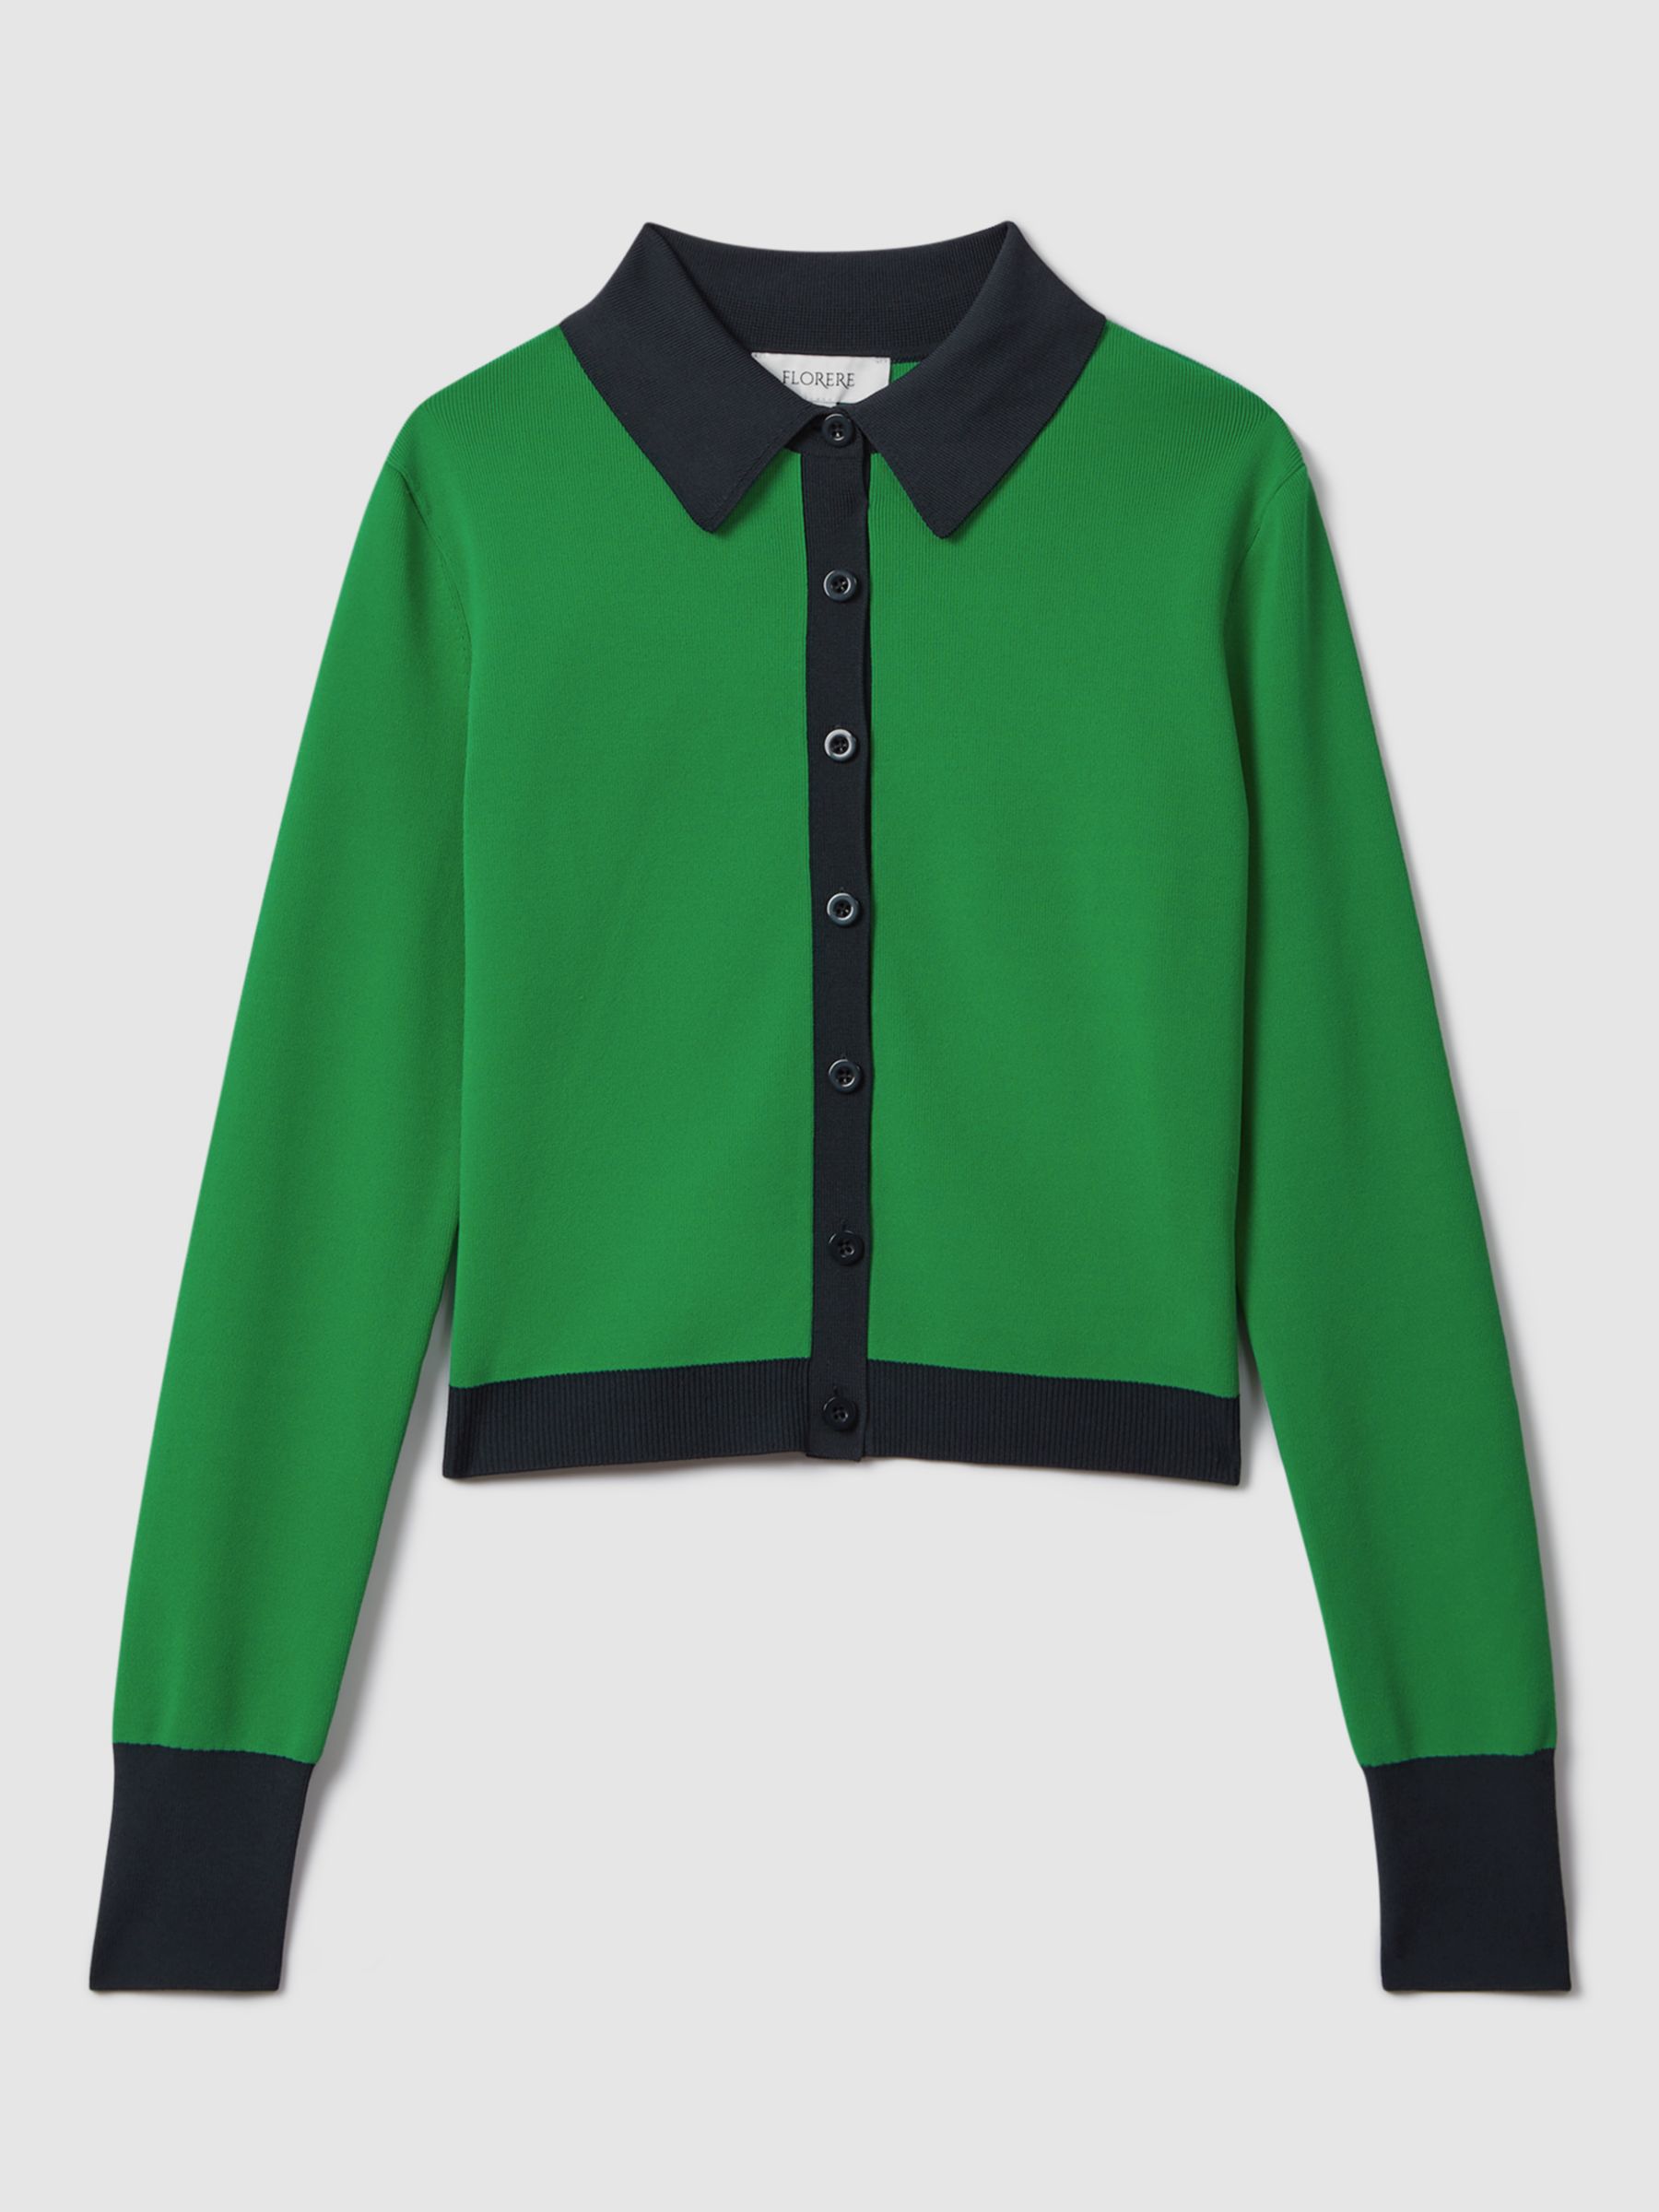 FLORERE Fitted Contrast Trim Cardigan, Bright Green/Navy, 10